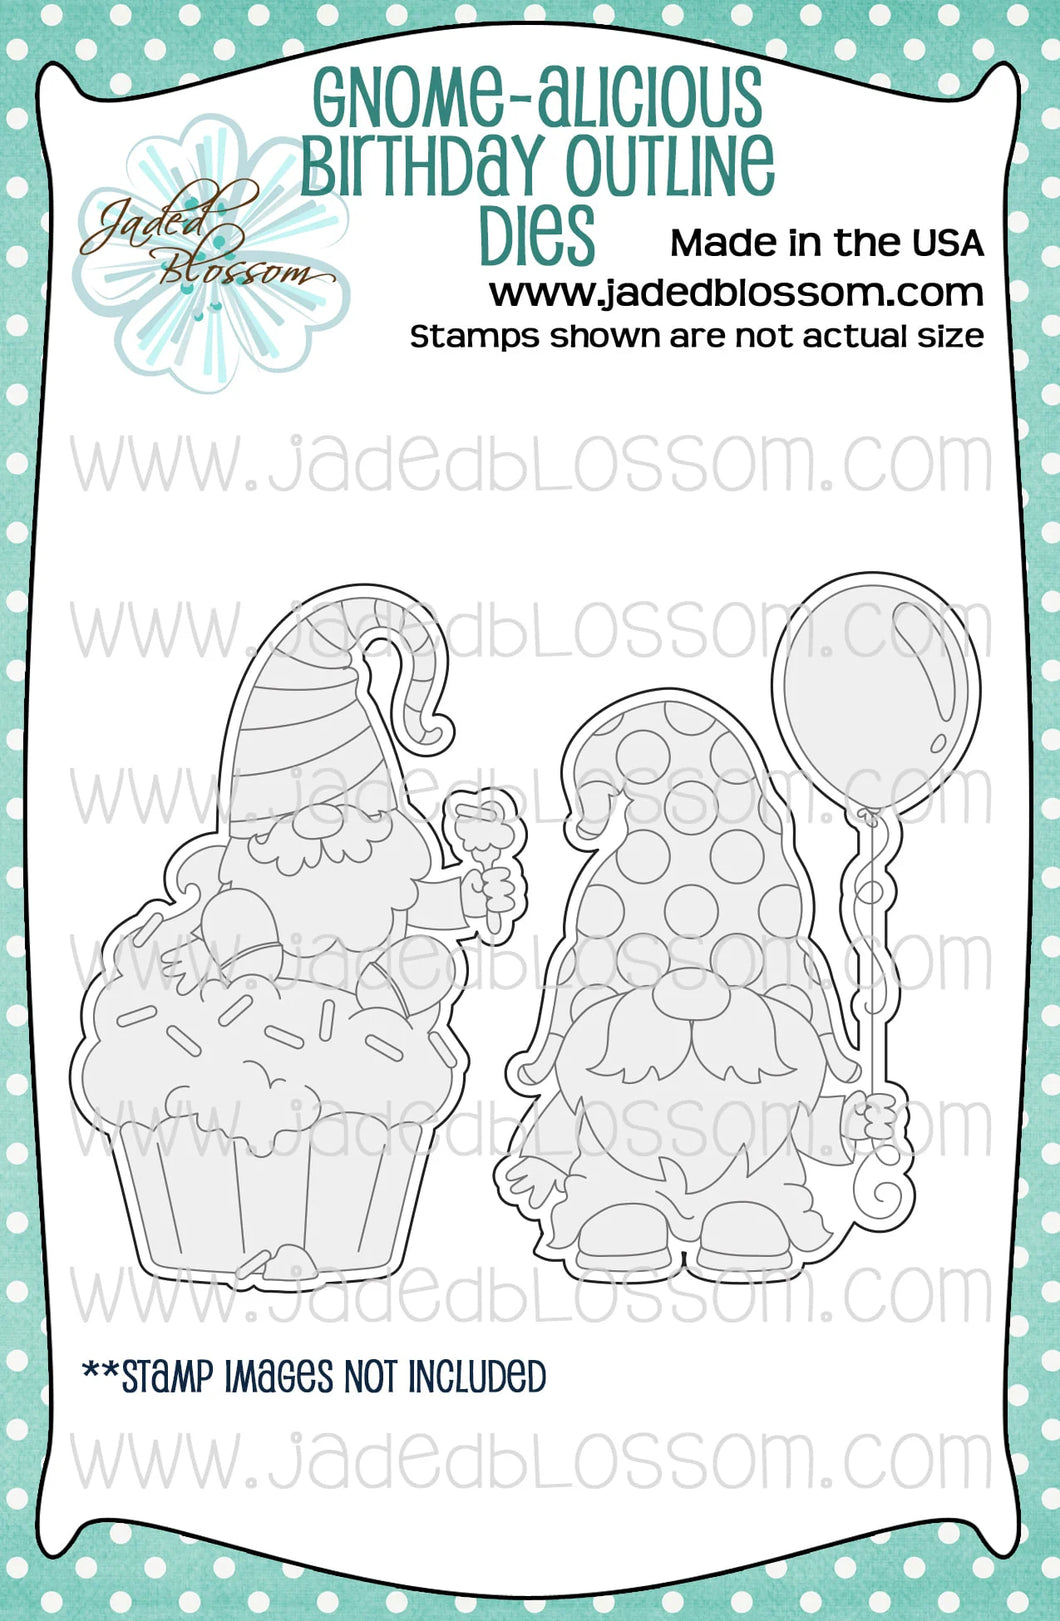 Jaded Blossom - Gnome-Alicious Stamp and Die Bundle